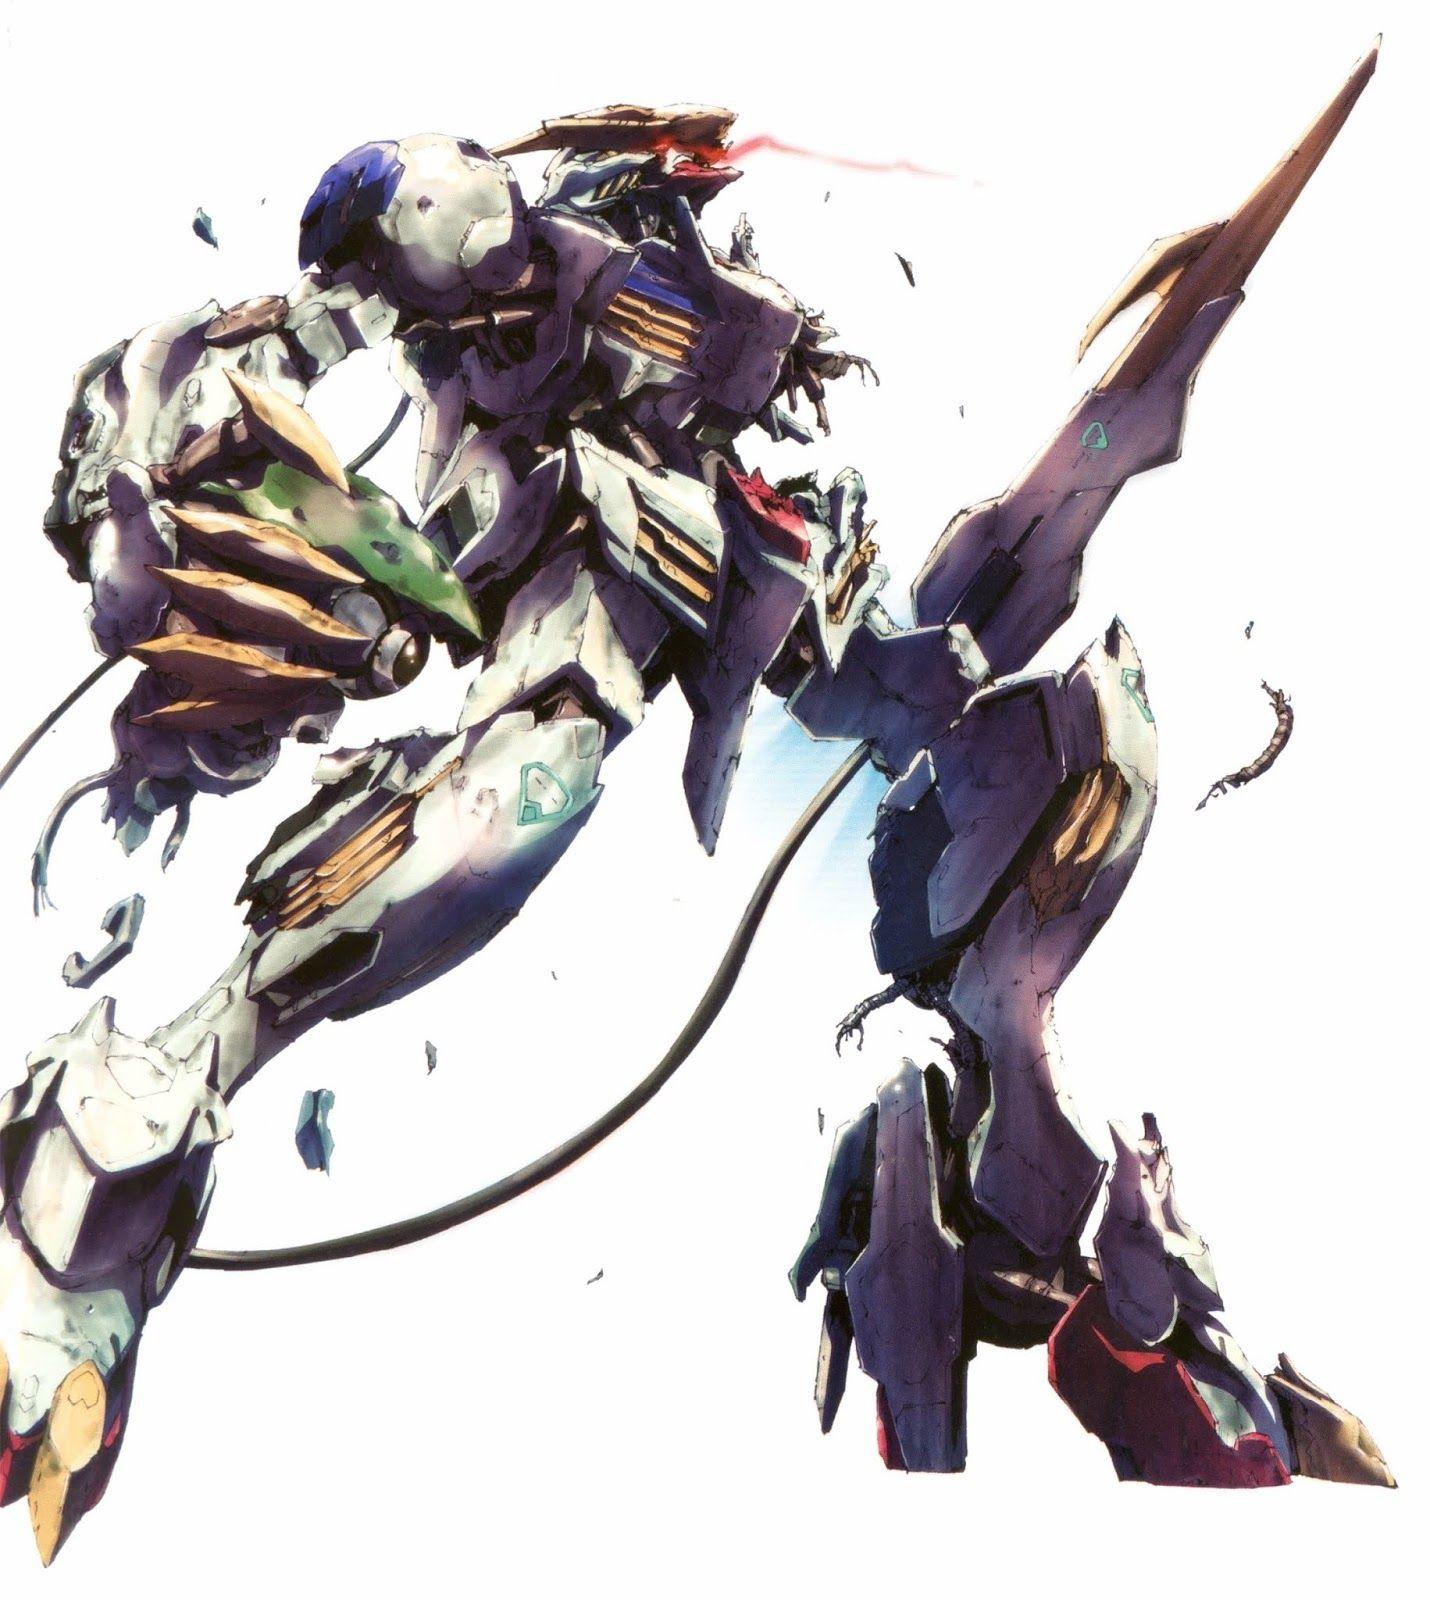 Some Iron Blooded ORPHANS Wallpaper Image Kits Collection